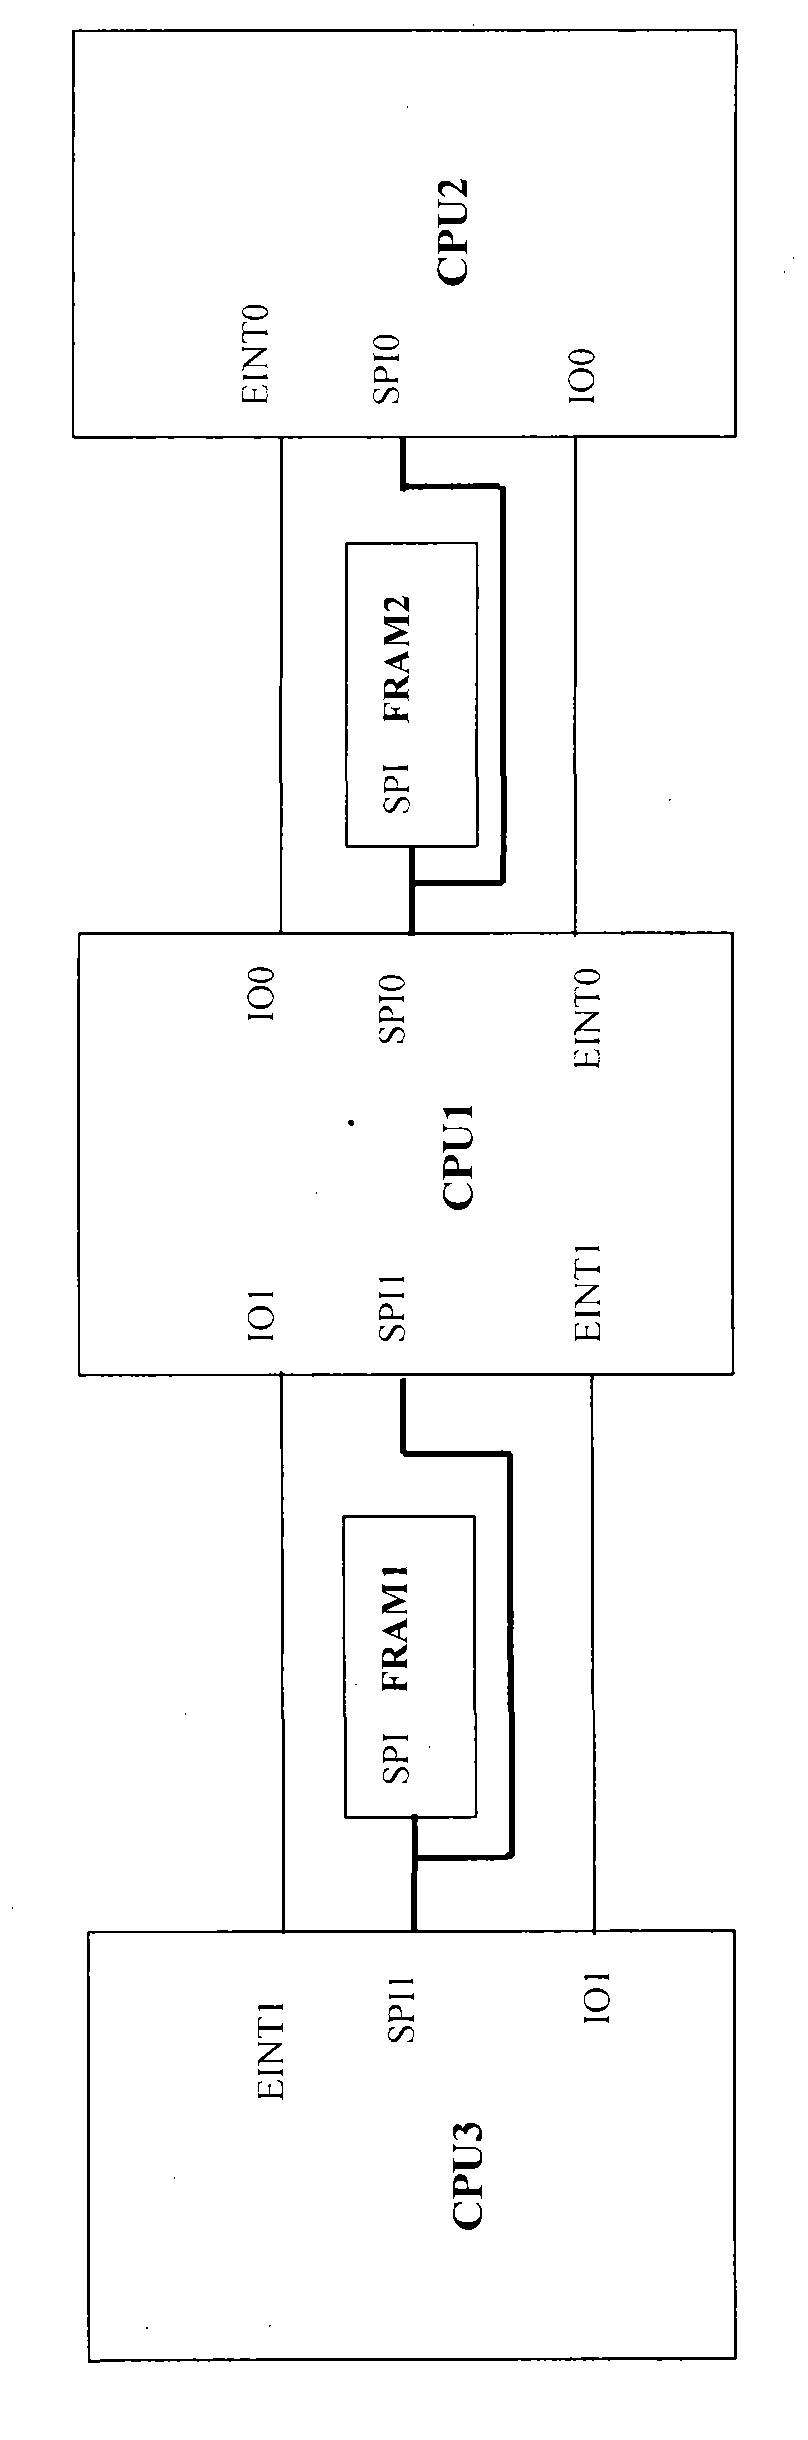 Multi-CPU communication method and relay protection device